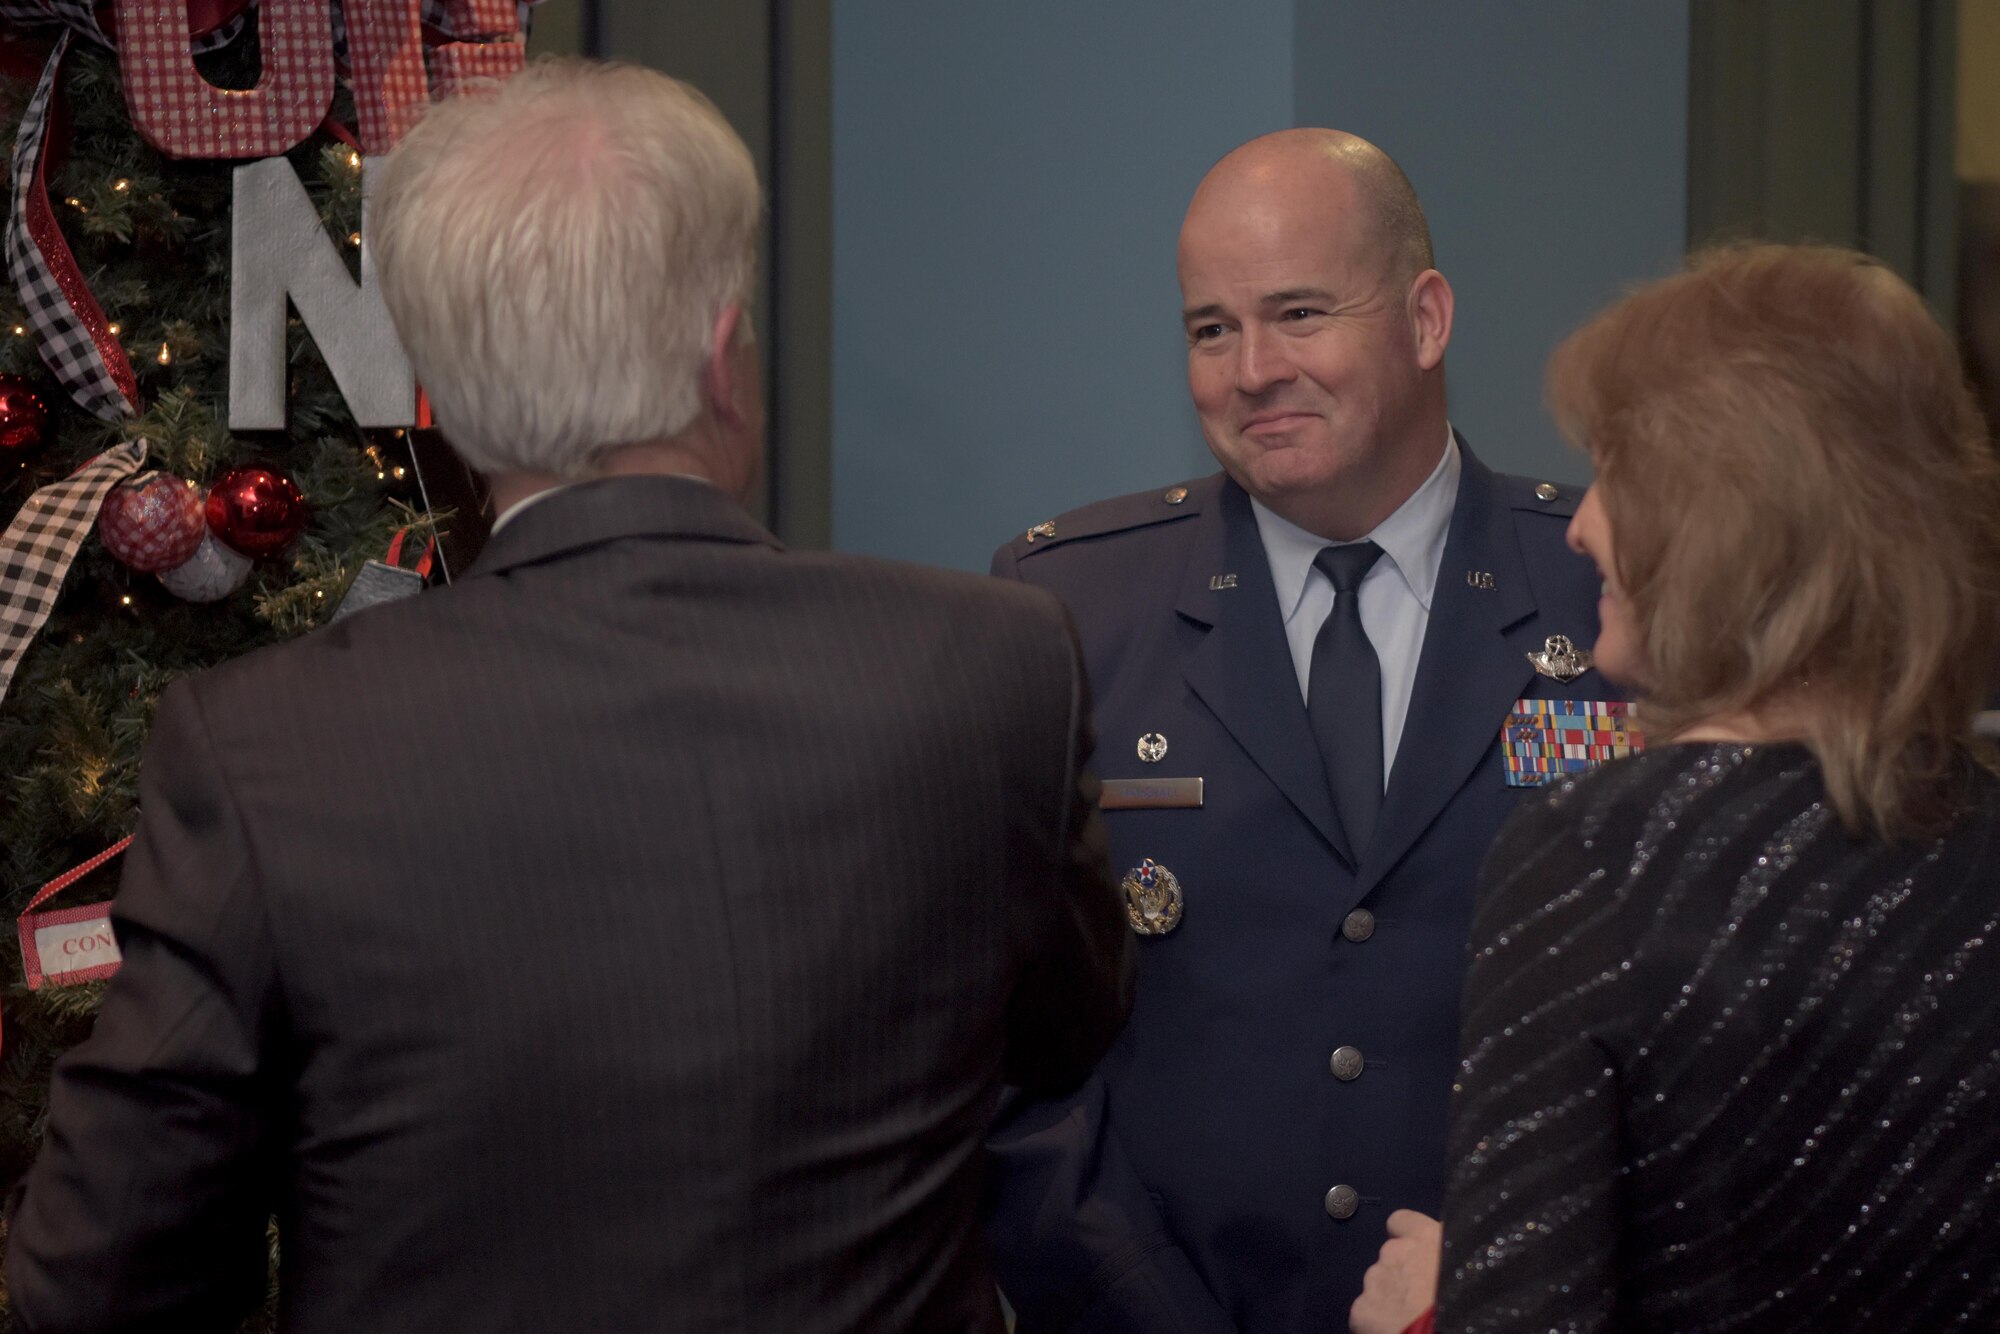 Col. William Marshshall, 48th Fighter Wing commander, speaks with community leaders during the 2019 Yuletide Reception at the Galaxy Club, RAF Mildenhall, Dec. 6, 2019. The Yuletide reception served to highlight the mutually beneficial relationship between the military and local communities. (U.S. Air Force photo by Senior Airman Benjamin Cooper)